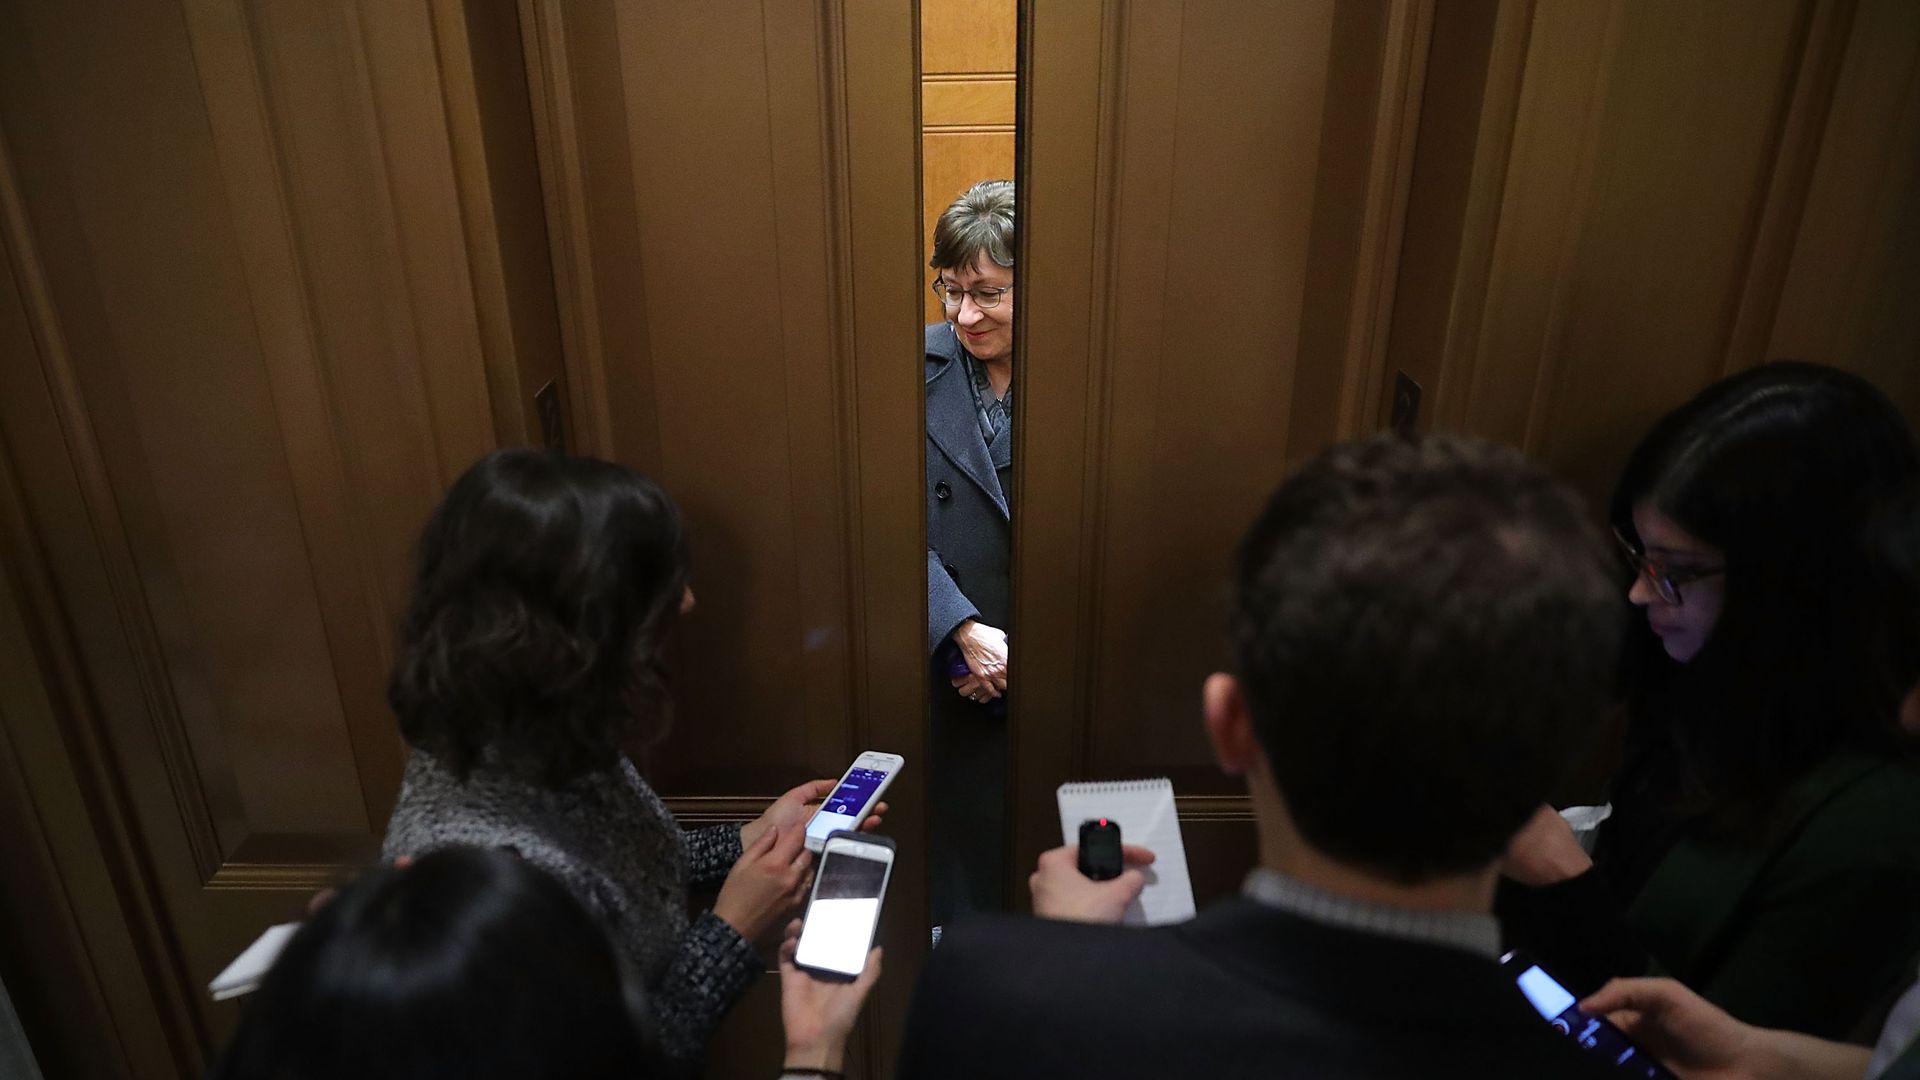 Susan Collins with elevator doors closing on her and reporters holding out recorders